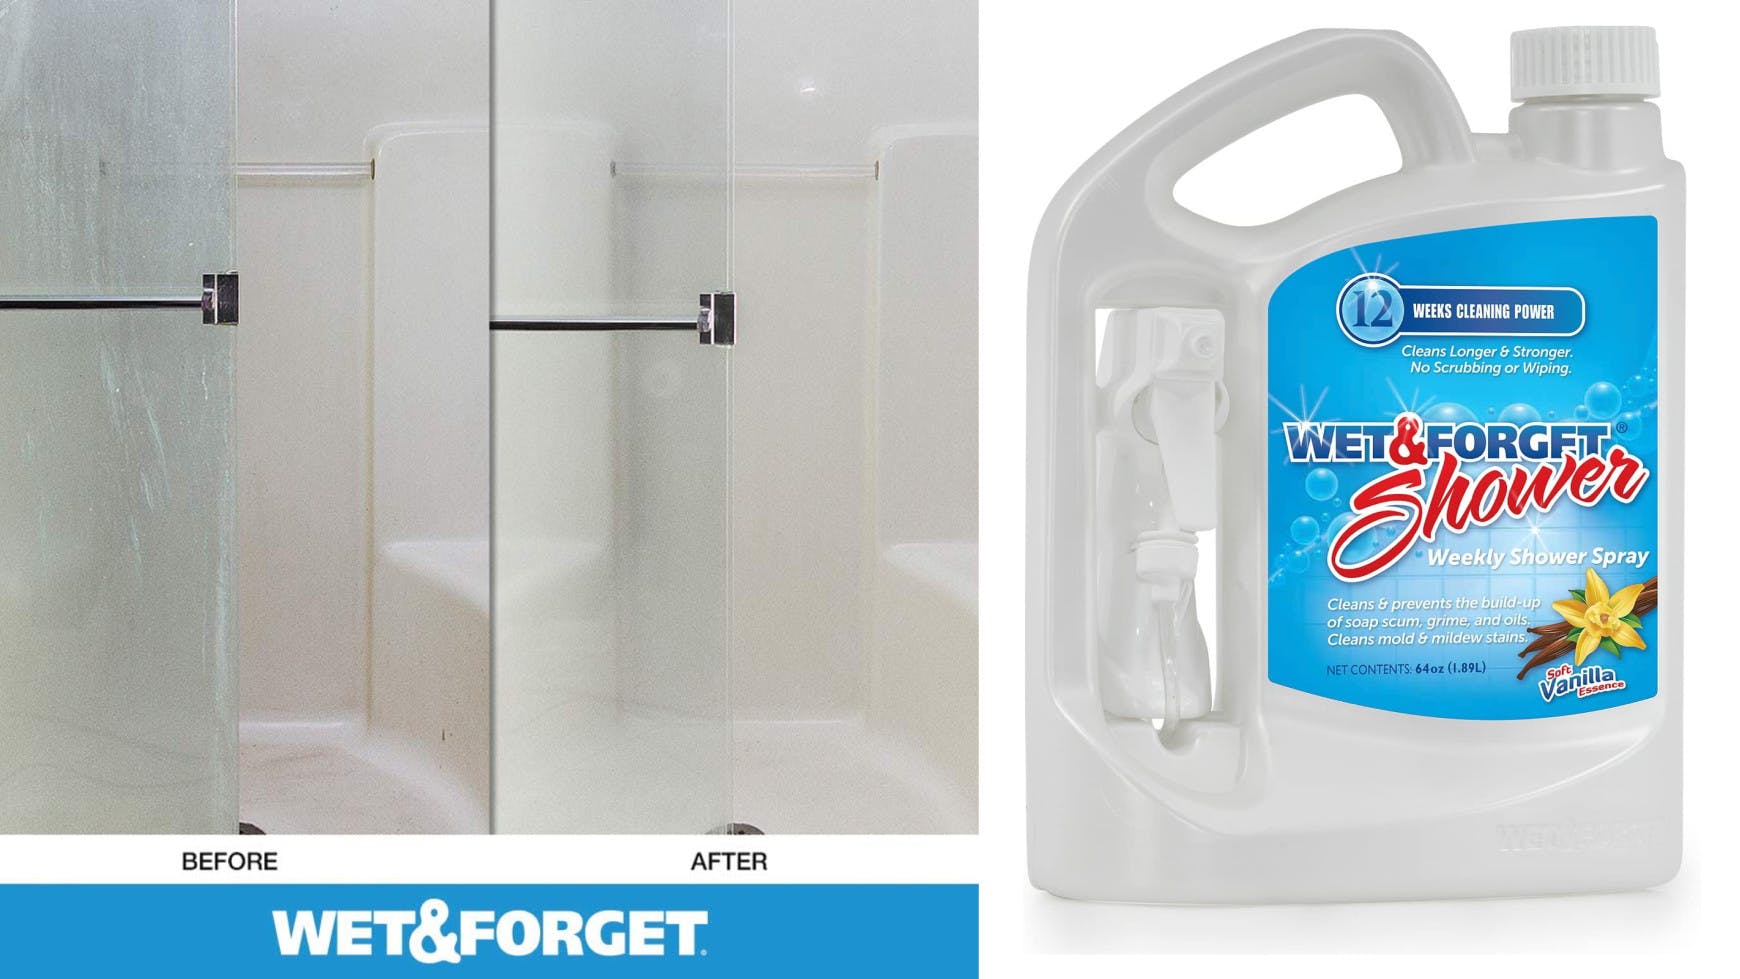 shower spray that'll clean walls without hard scrubbing